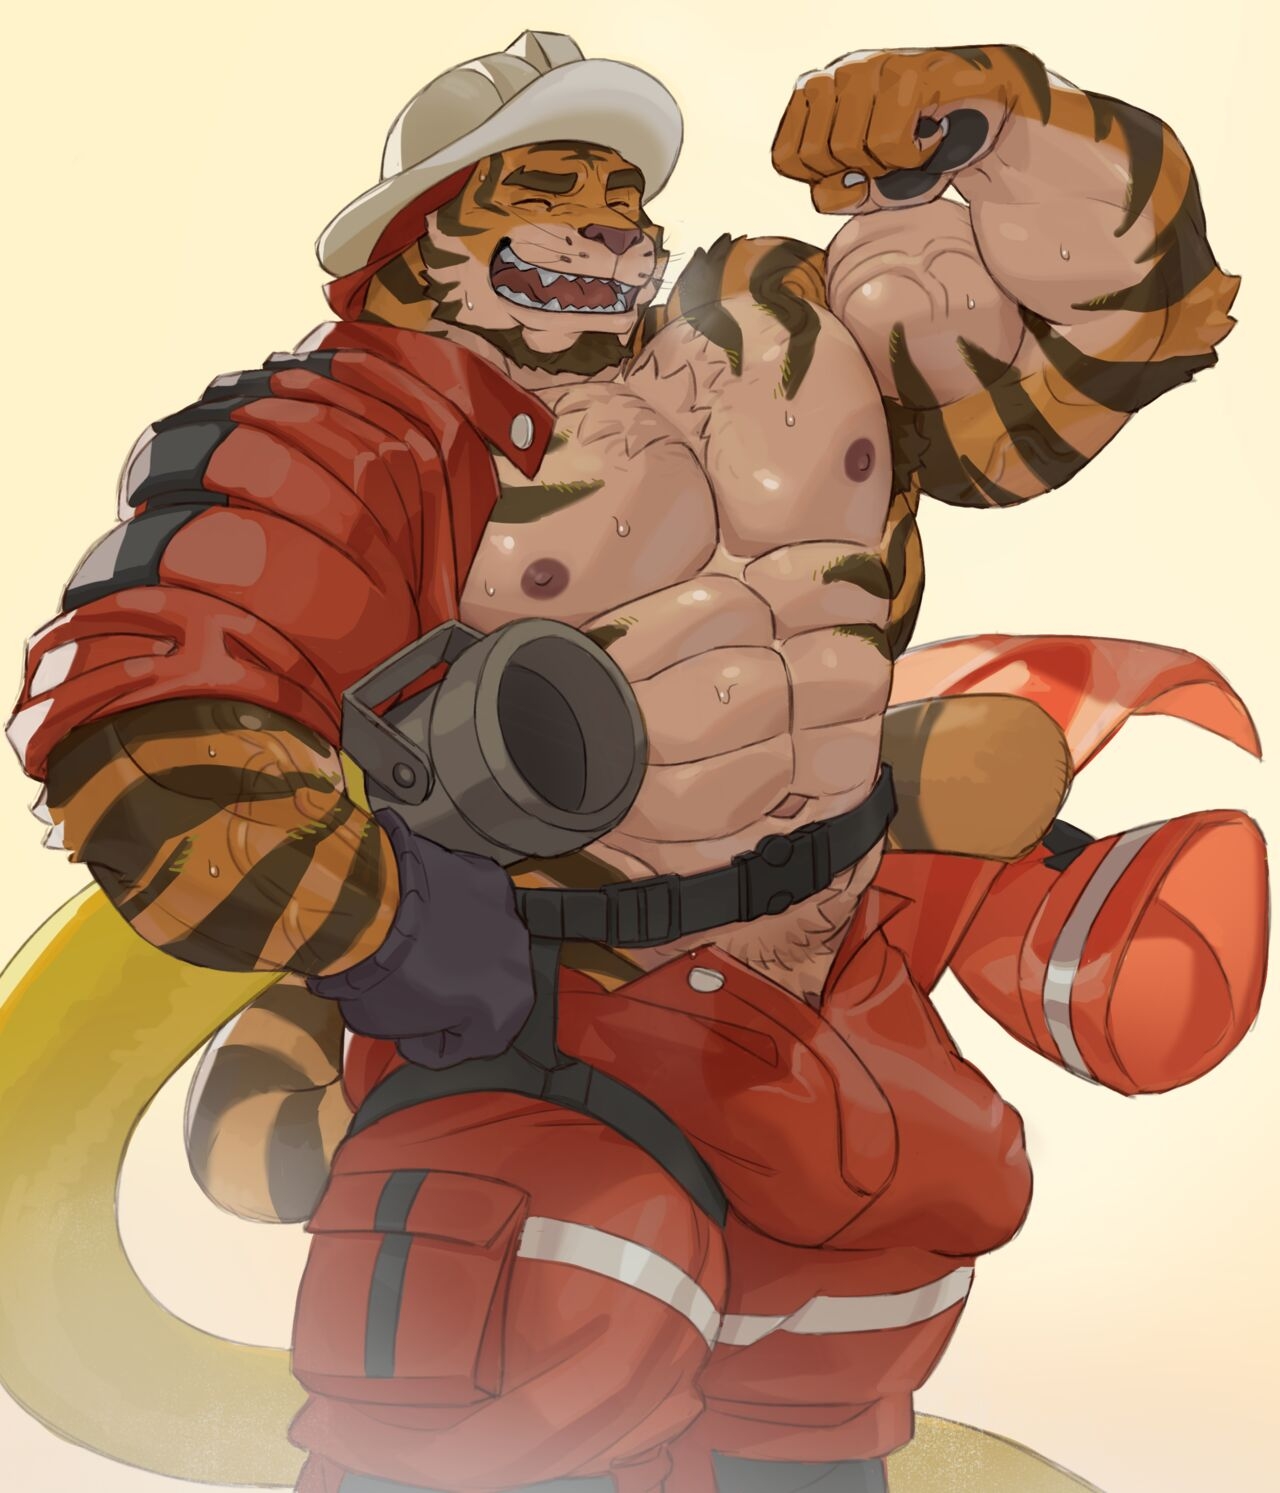 [Imatoart] Tiger Fire Chief's Training Session | 老虎消防队长的训练时间! [Chinese][Translated by Chrome Heart Tags] 31